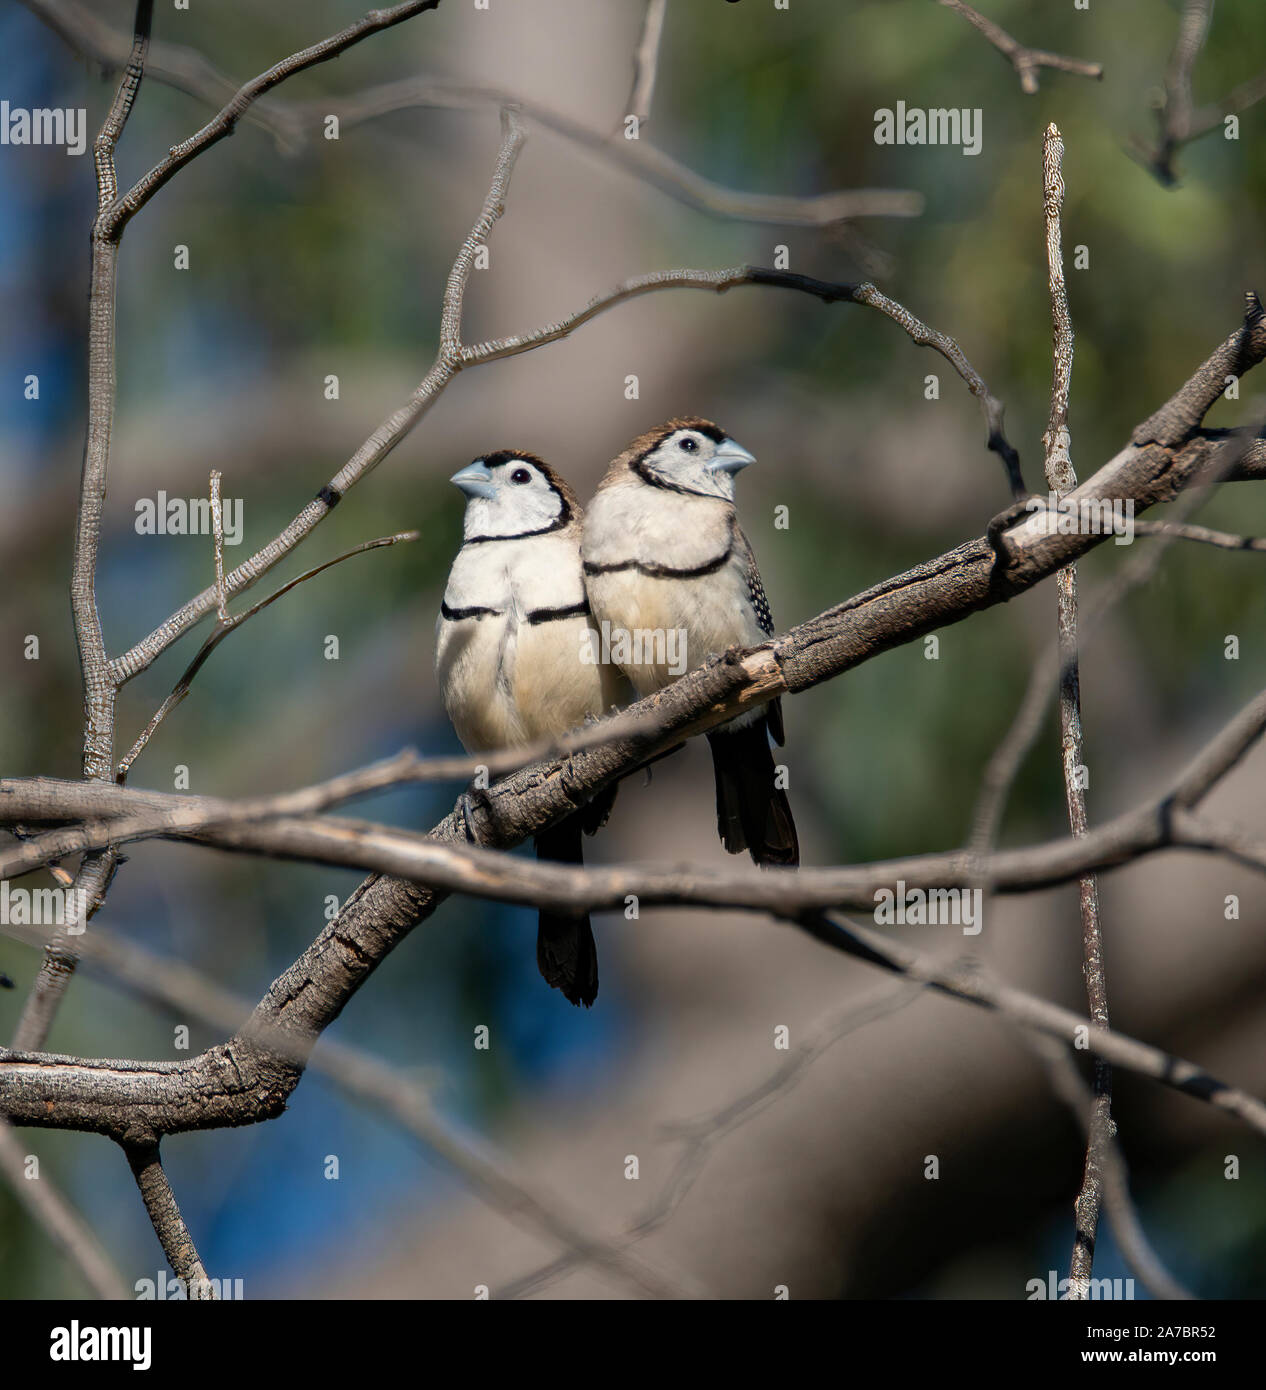 A  pair of Double-barred Finches snuggled close and showing affection to each other Stock Photo